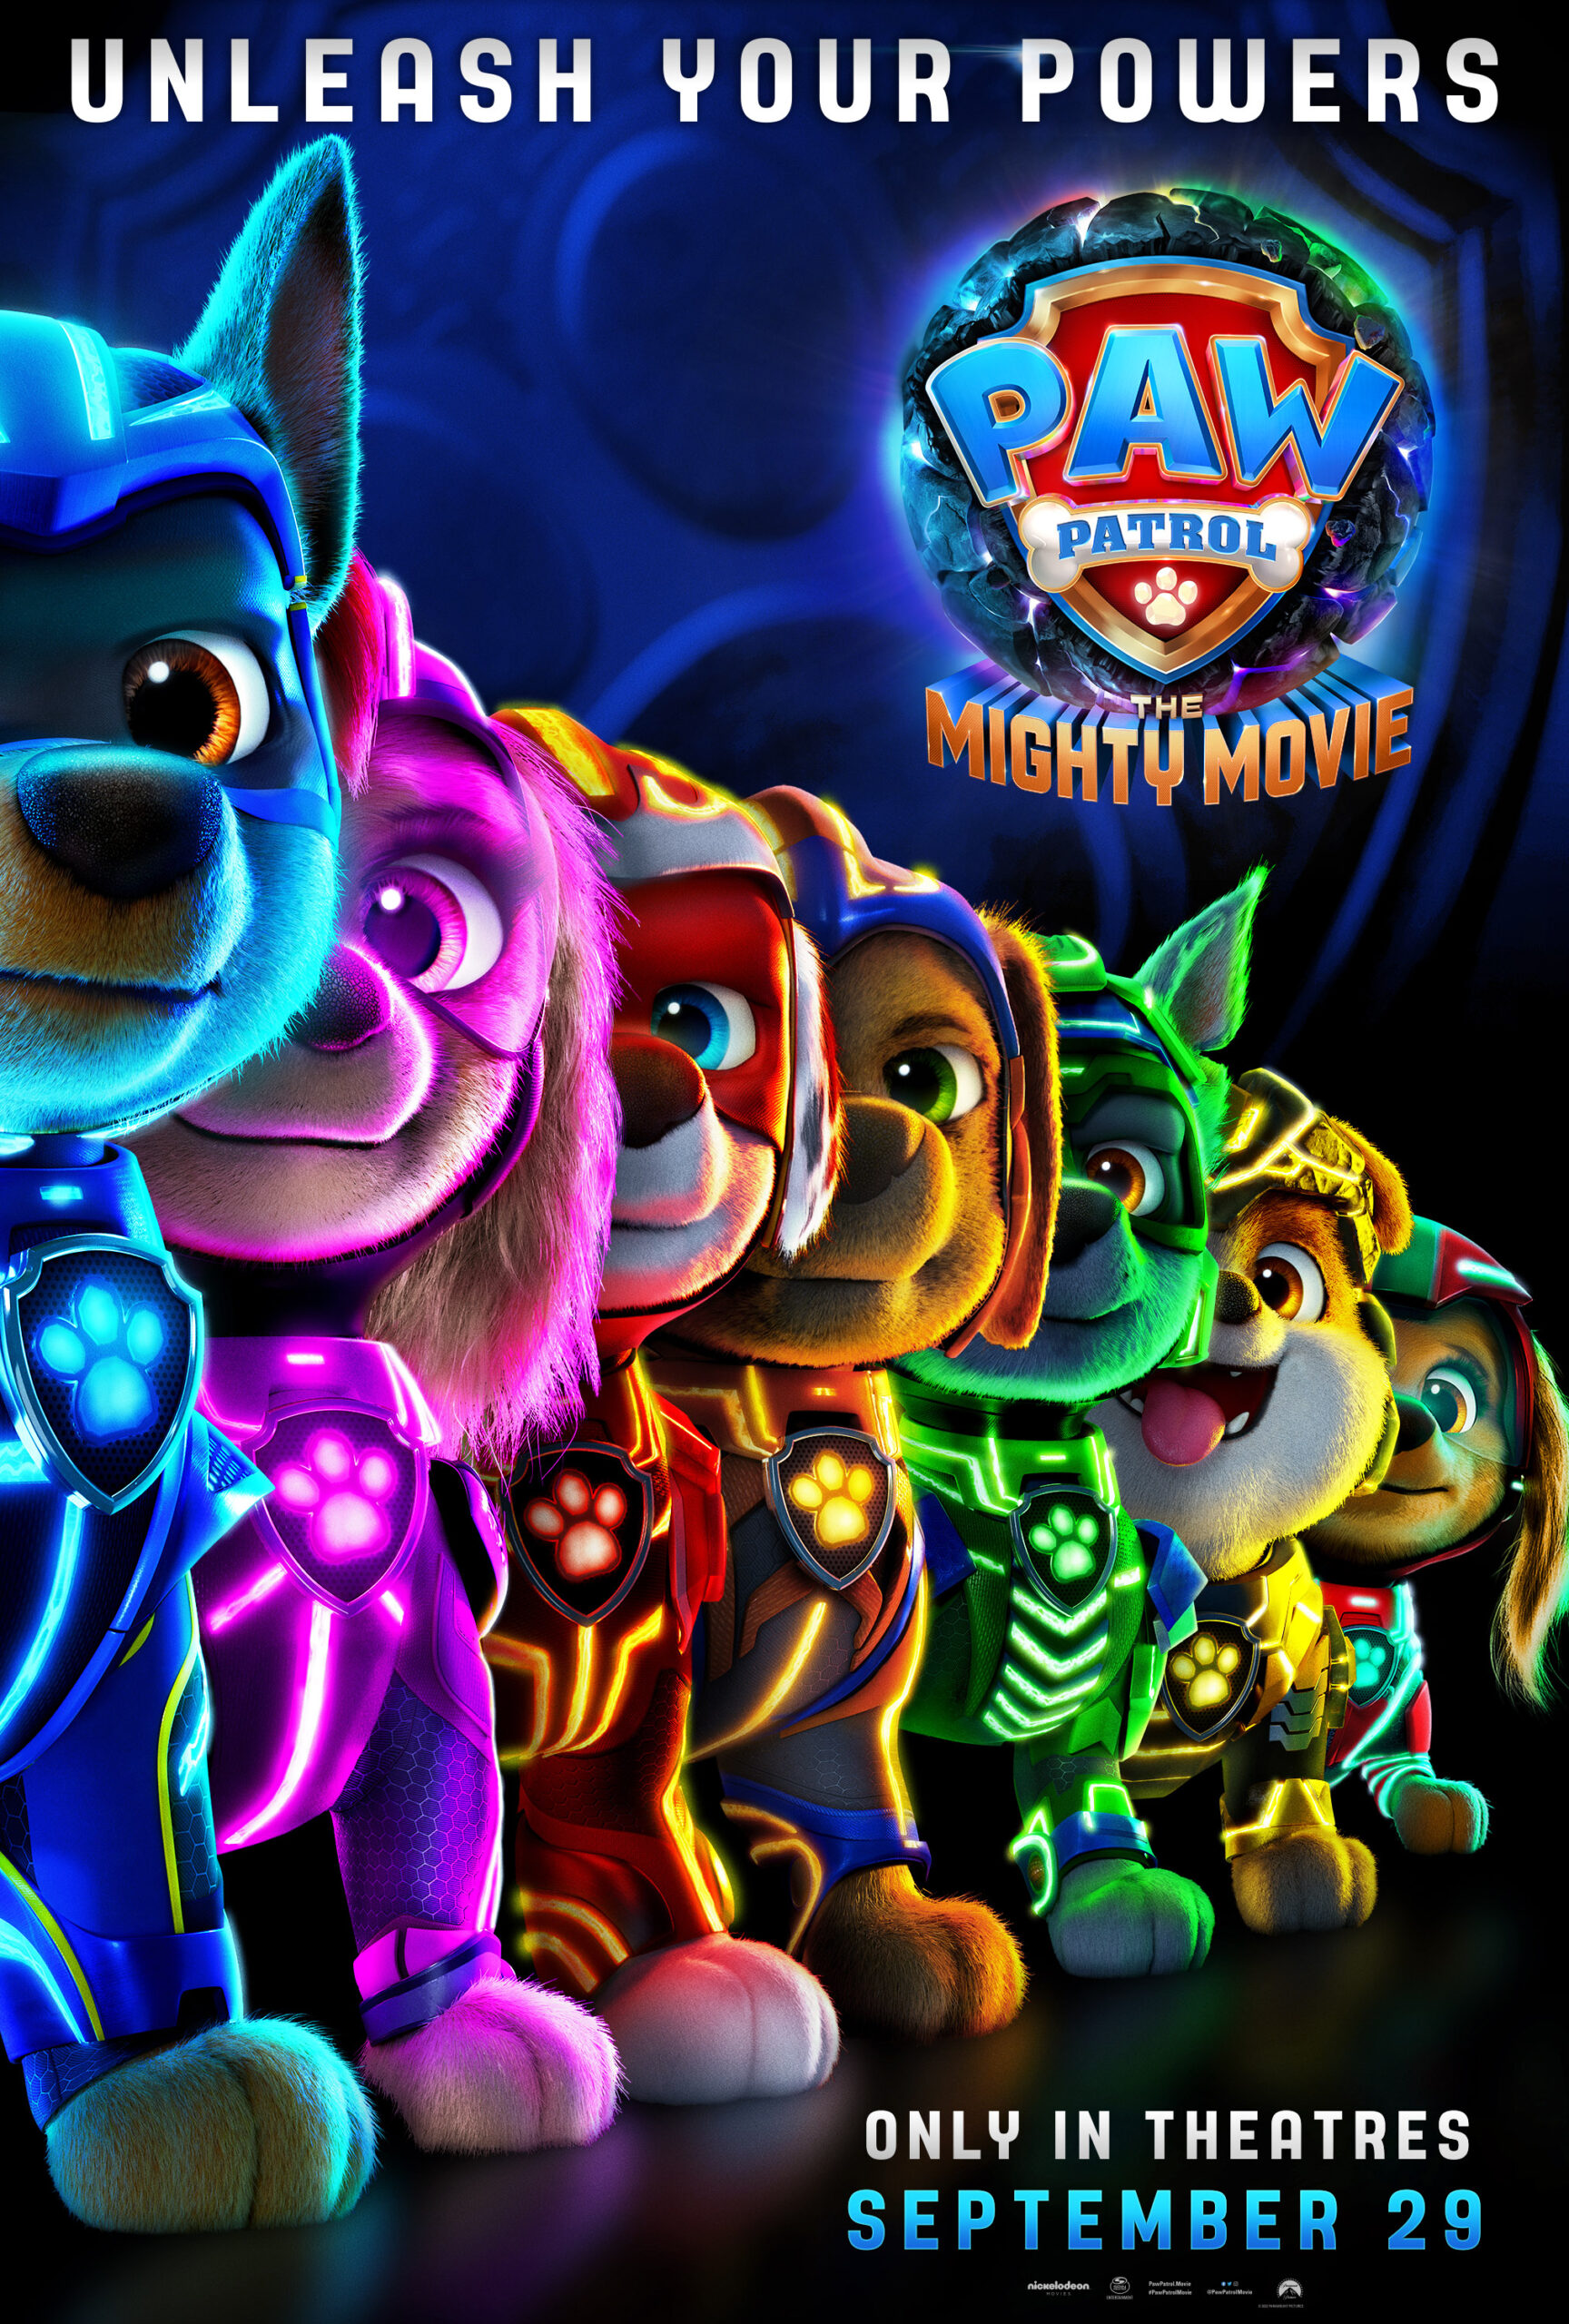 Paw Patrol: The Mighty Movie poster (Paramount Pictures/Nickelodeon Movies/Spin Master Entertainment)